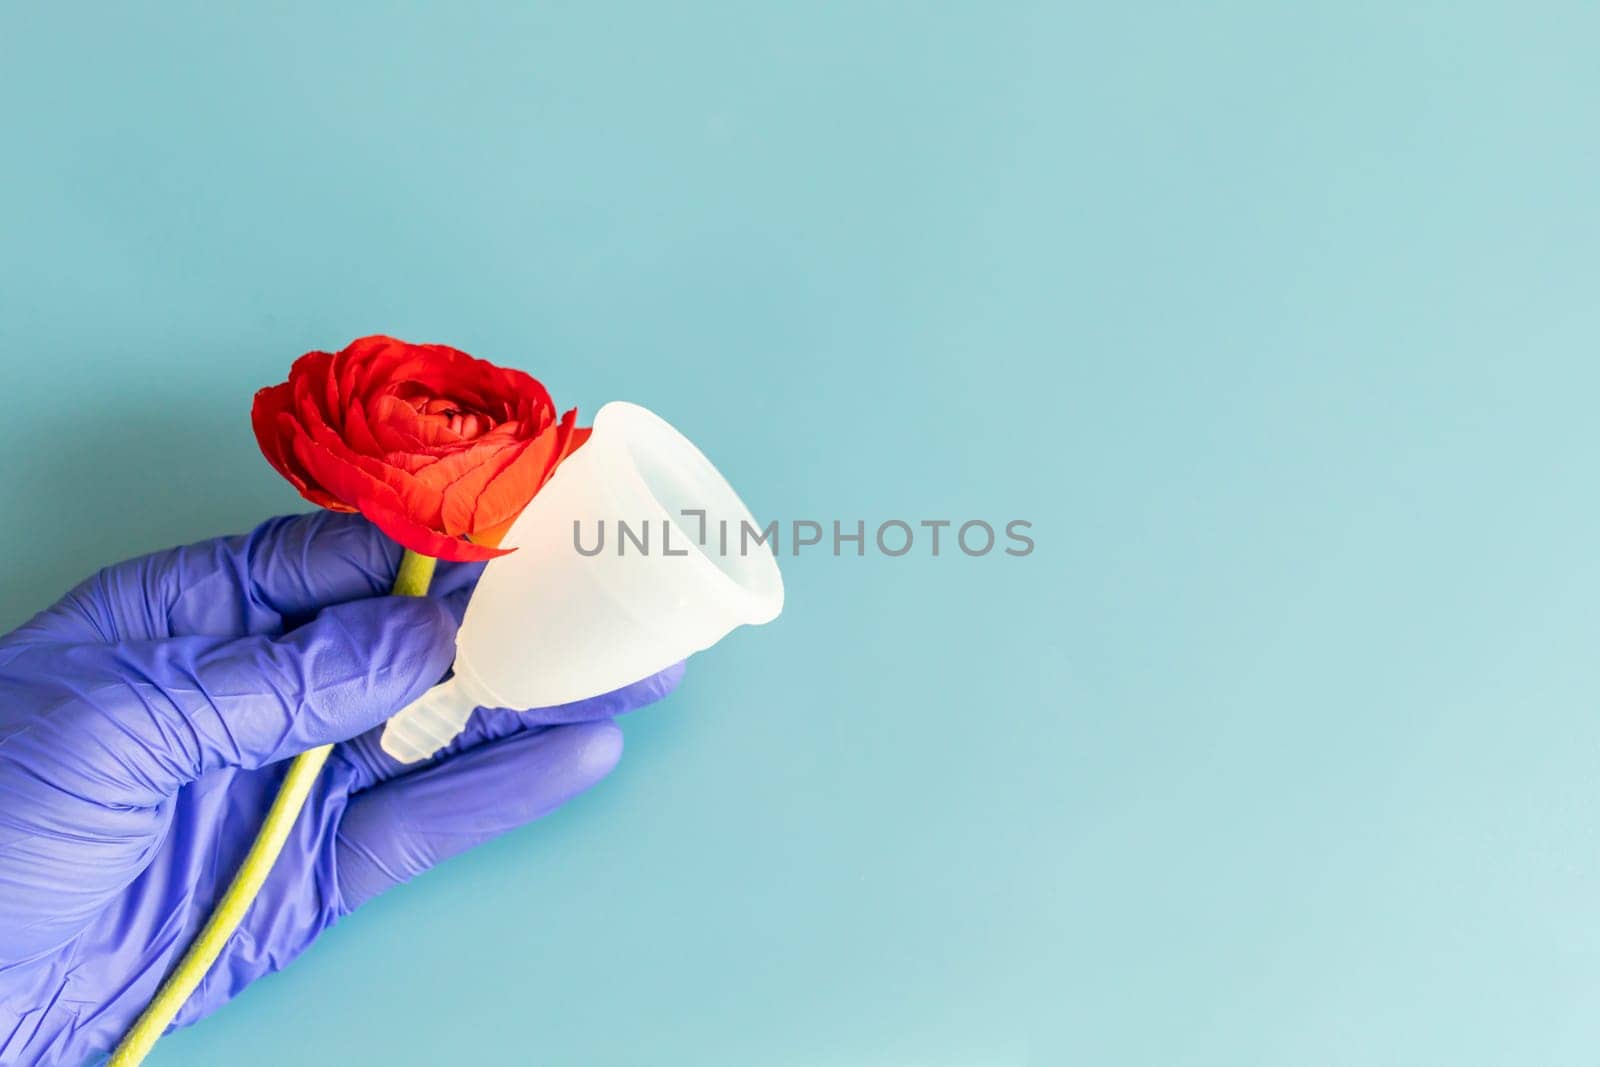 Mockup World Menstrual Hygiene Day On May, 28. Human Hand in Glove Holds menstrual cup and Red Flower on Blue Backdrop Copy Space, Horizontal Plane, Design by netatsi